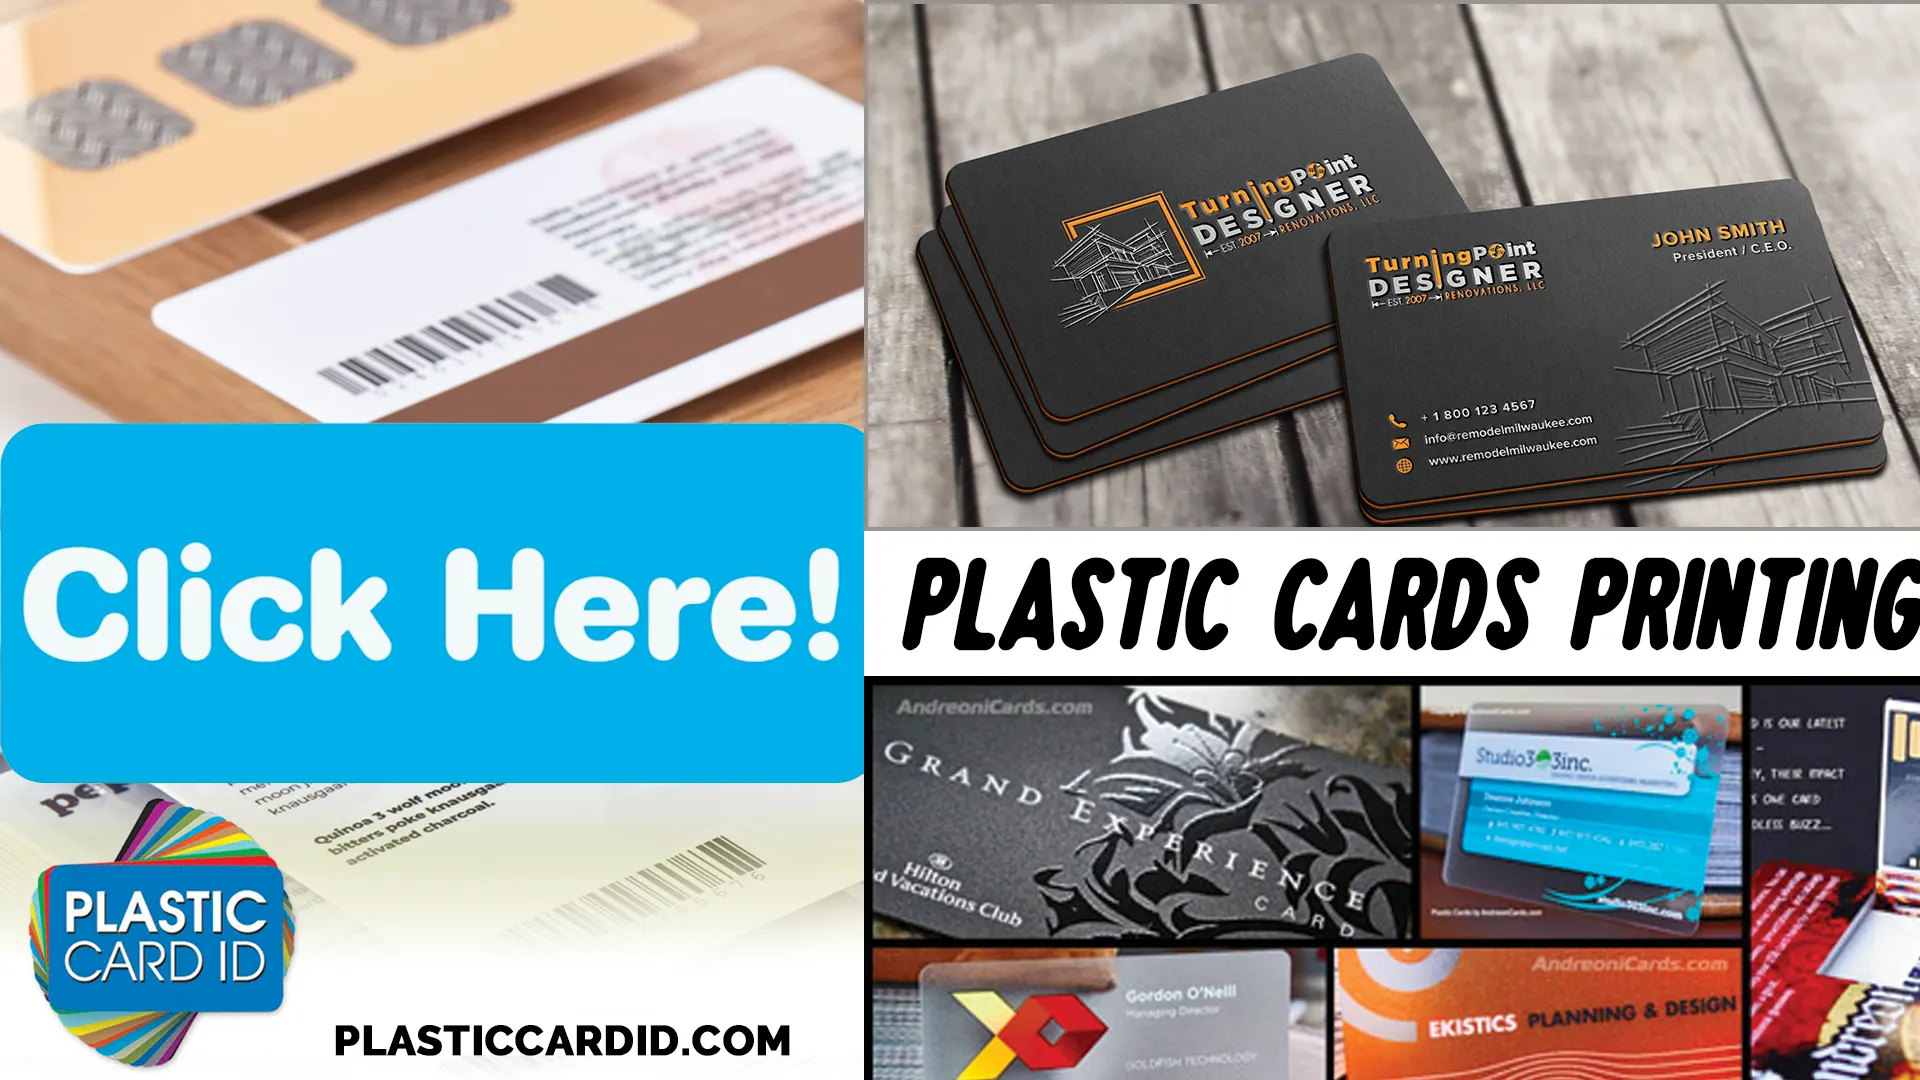 Optimize Your Card Printing with Splendid Printers from Plastic Card ID




